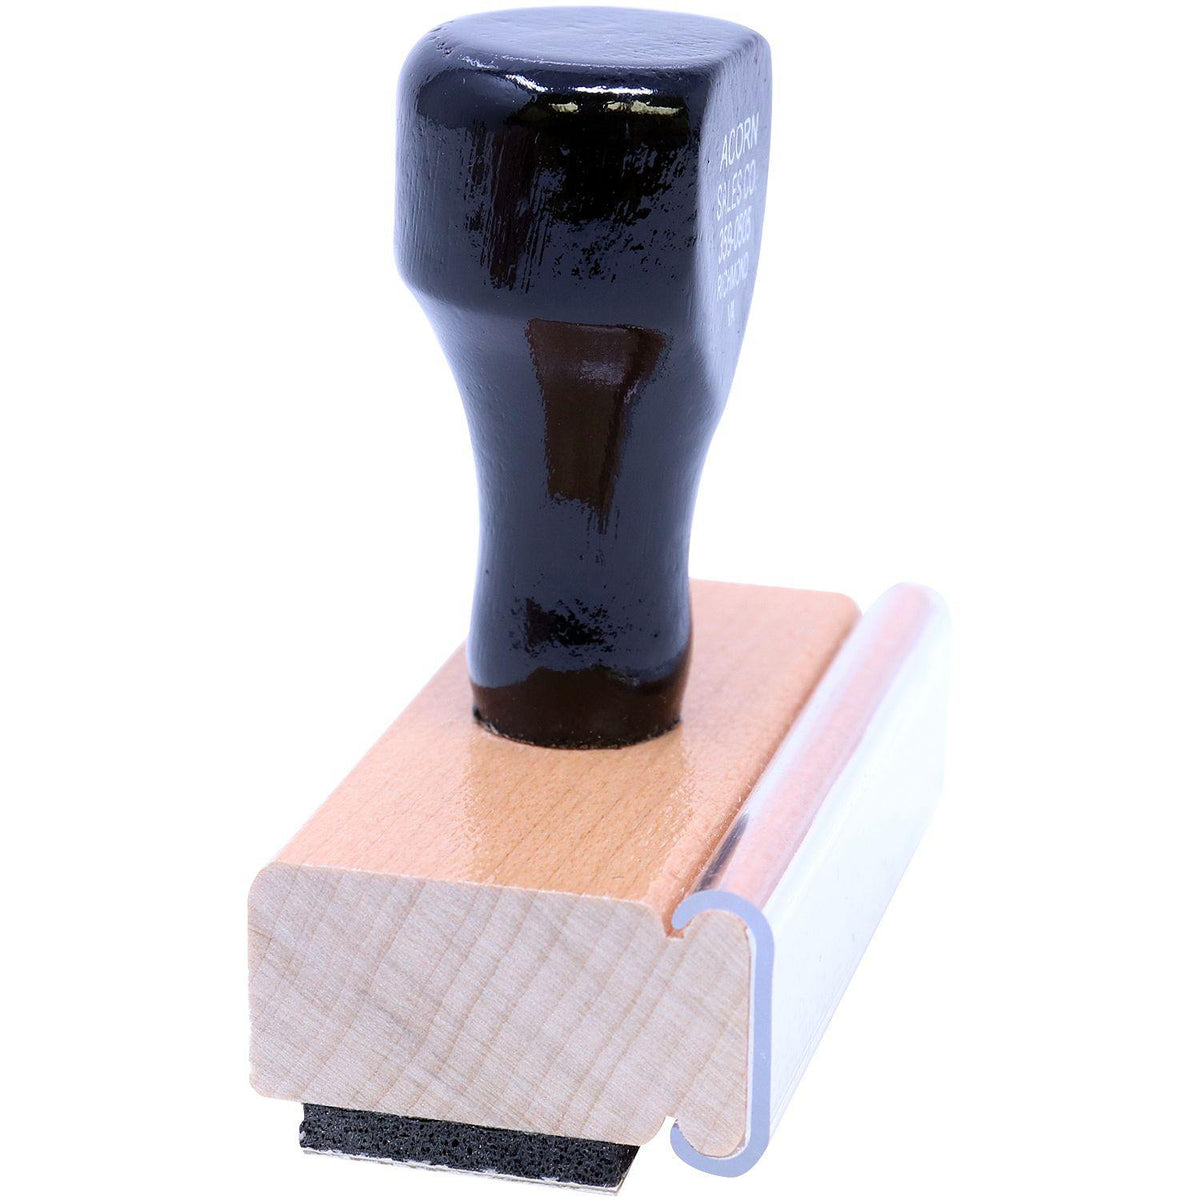 Side View of Bank Stamp Atm Rubber Stamp at an Angle